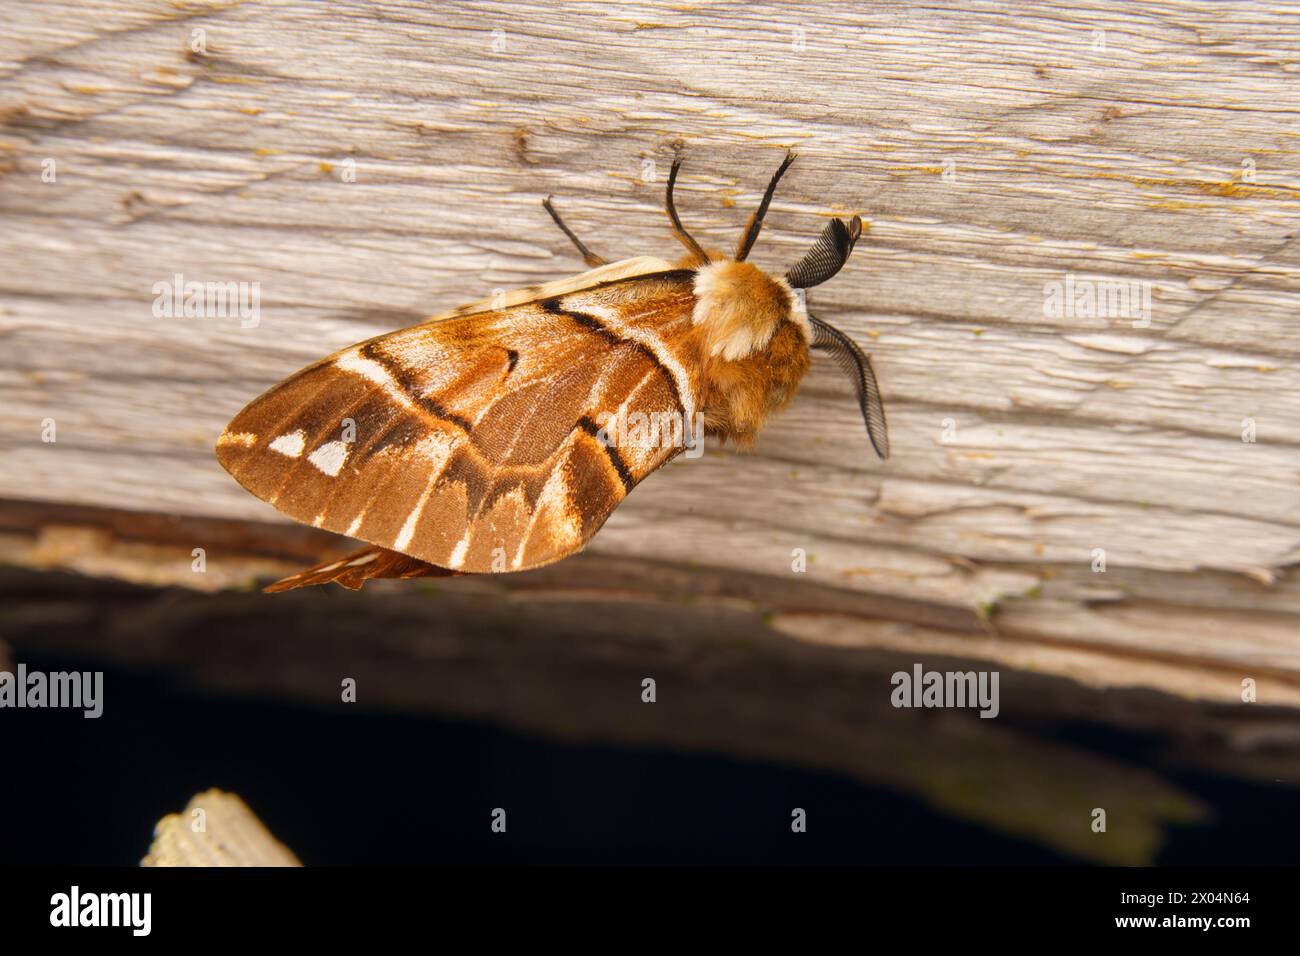 Endromis versicolora Family Endromidae Genus Endromis Kentish glory moth wild nature insect wallpaper, picture, photography Stock Photo